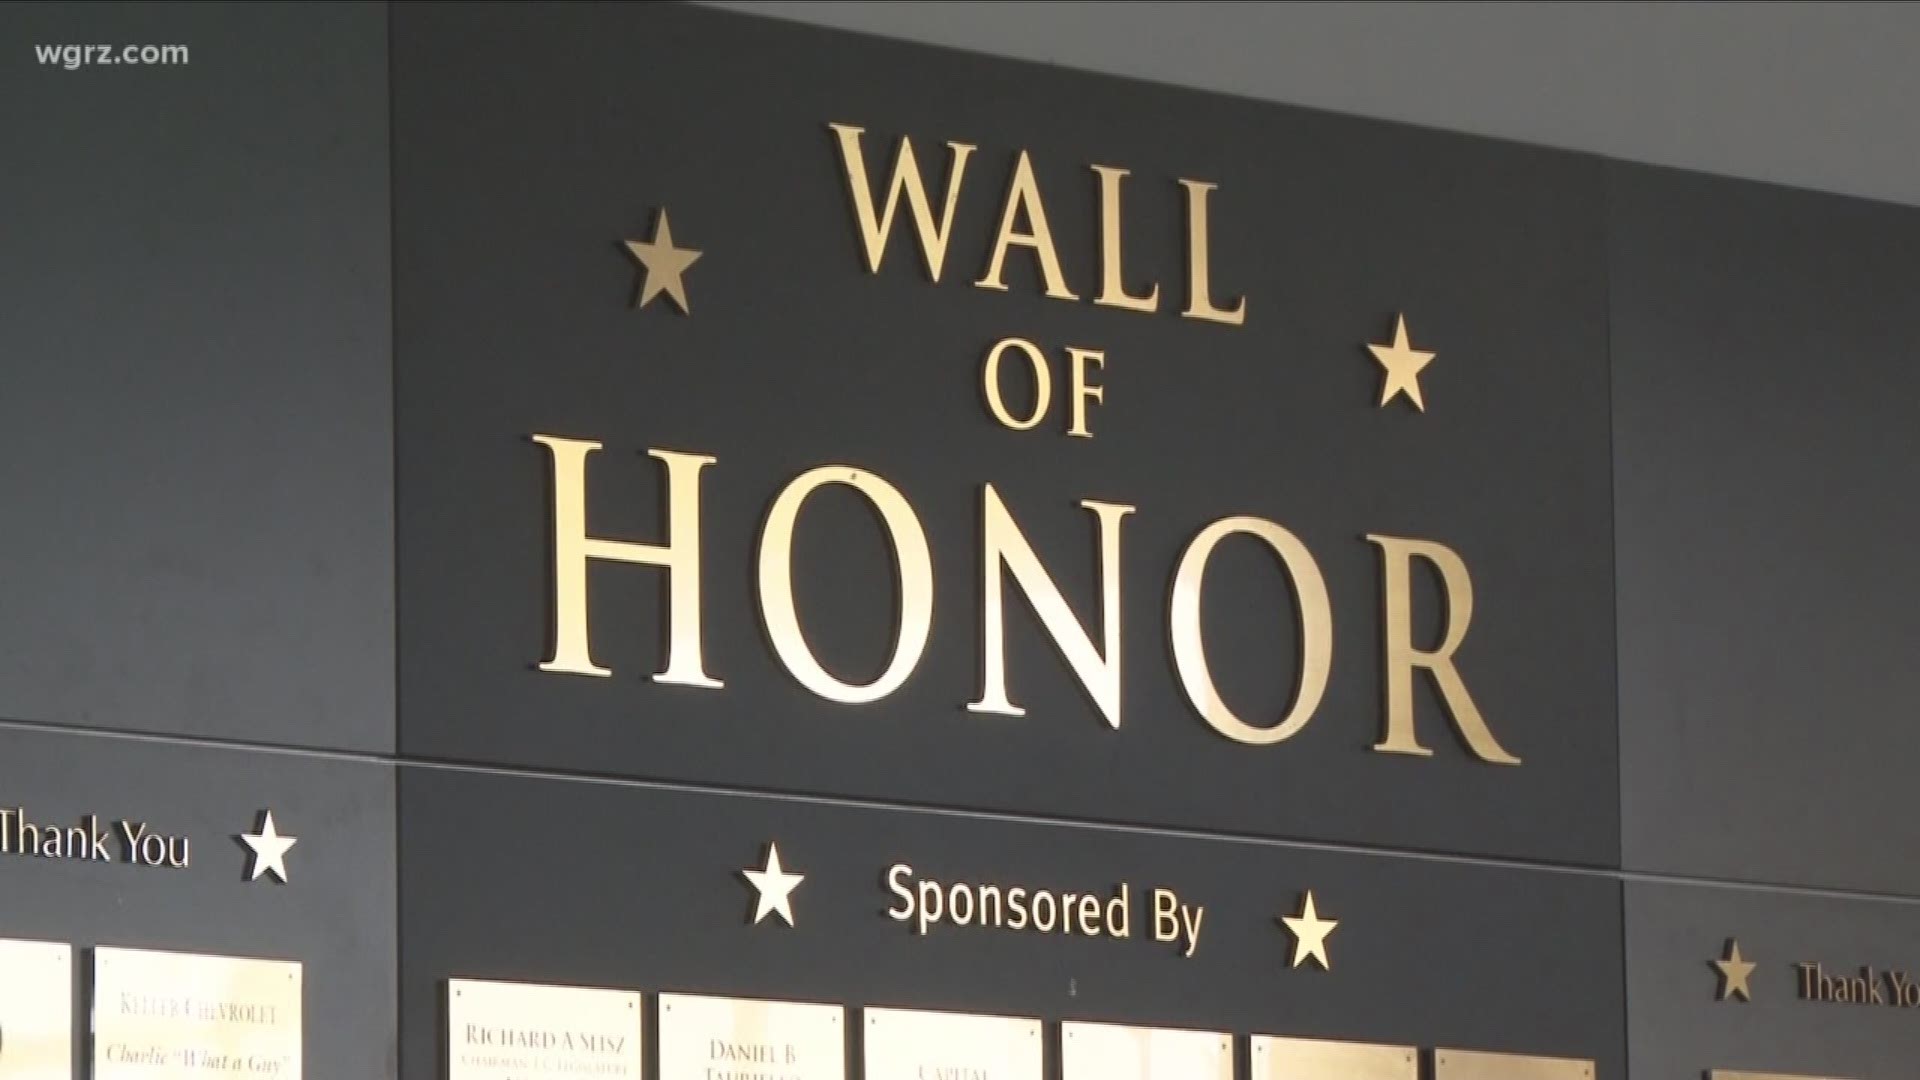 New additions to Naval park's Wall of honor